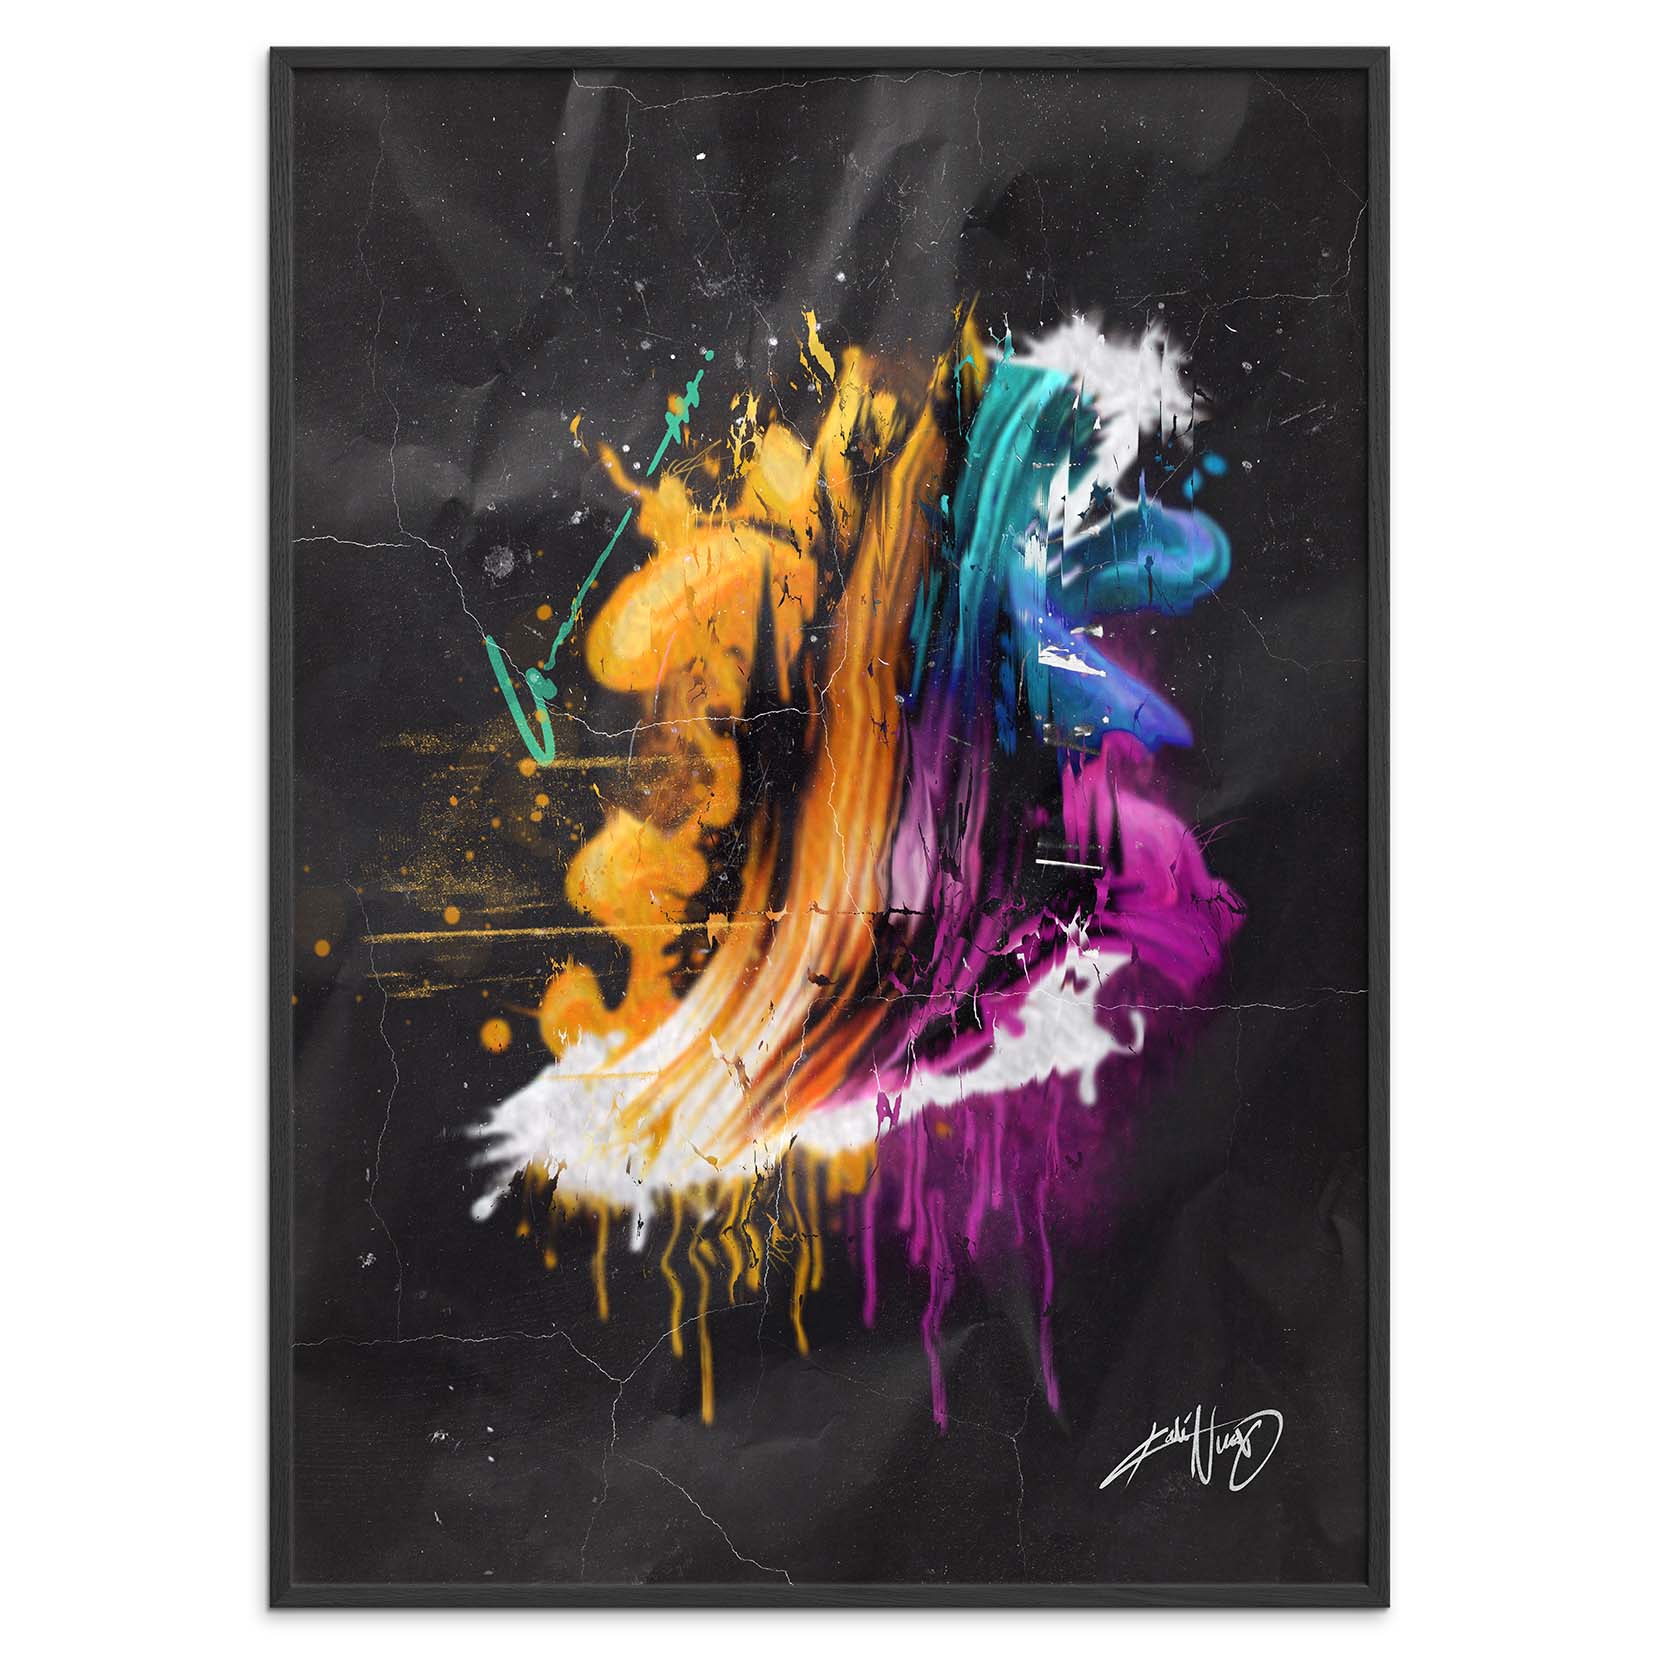 colorful calligraphy abstract art poster in a black wood frame on a white background